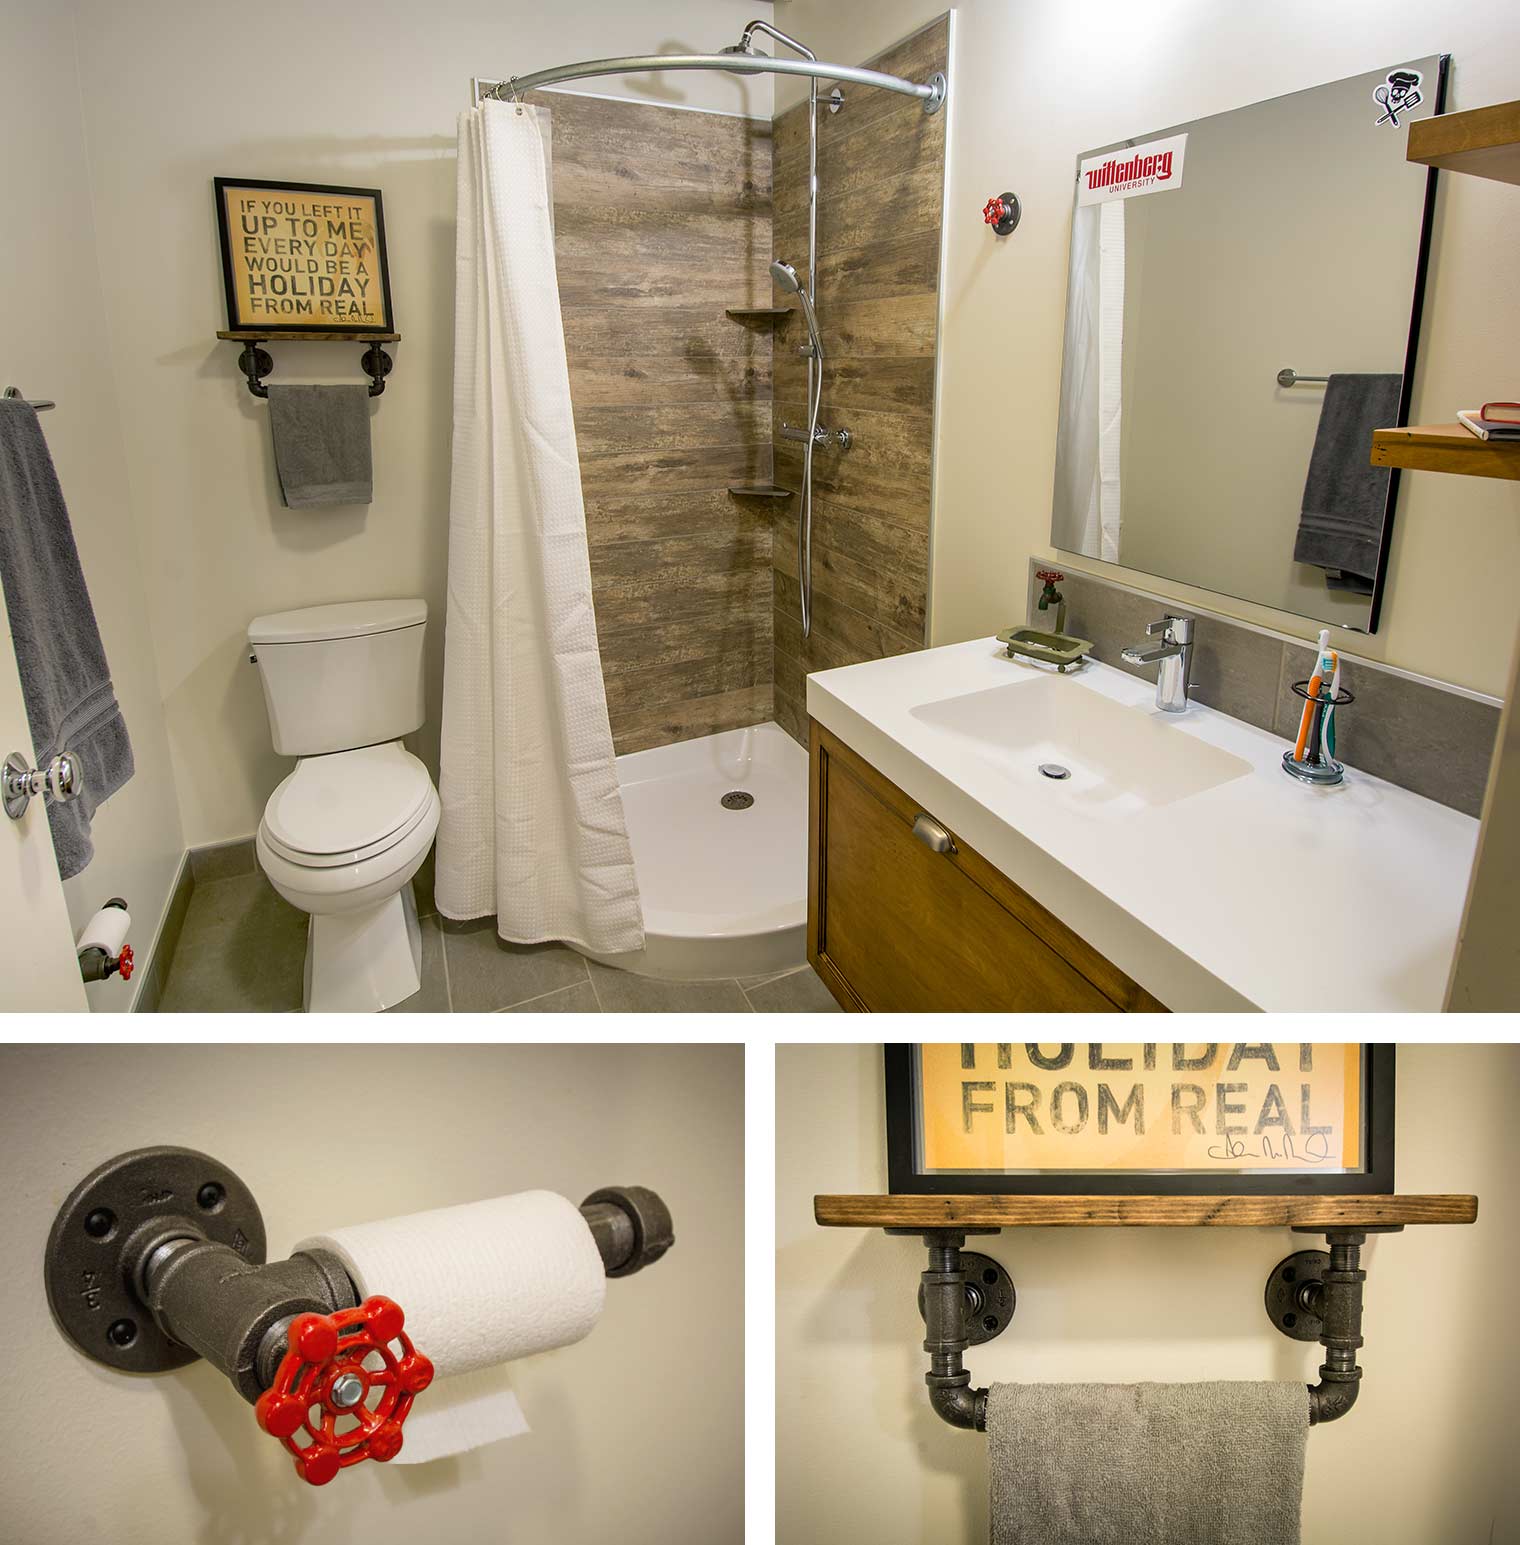 galvanized metal pipes as towel rack and toilet paper holder in Des Moines loft remodel by Silent Rivers